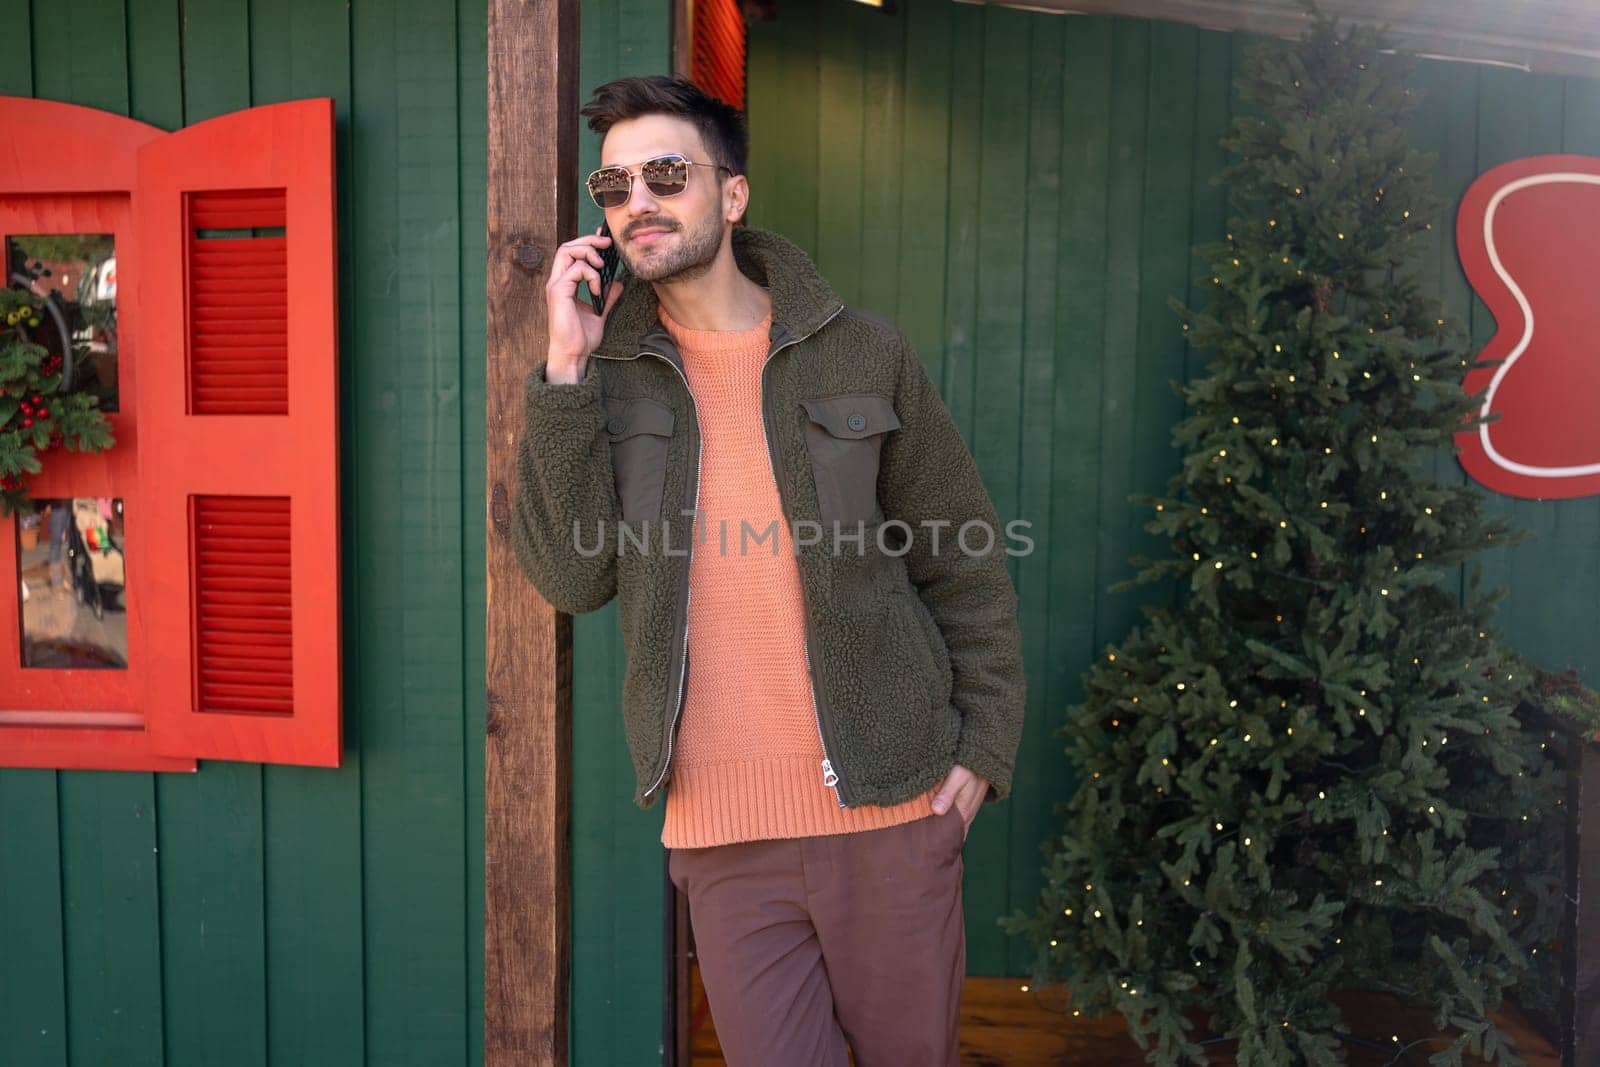 Handsome Caucasian man wearing sunglasses standing decorated town near Christmas tree while talking on his smartphone. He appears stylish as he extends holiday greetings using his mobile phone